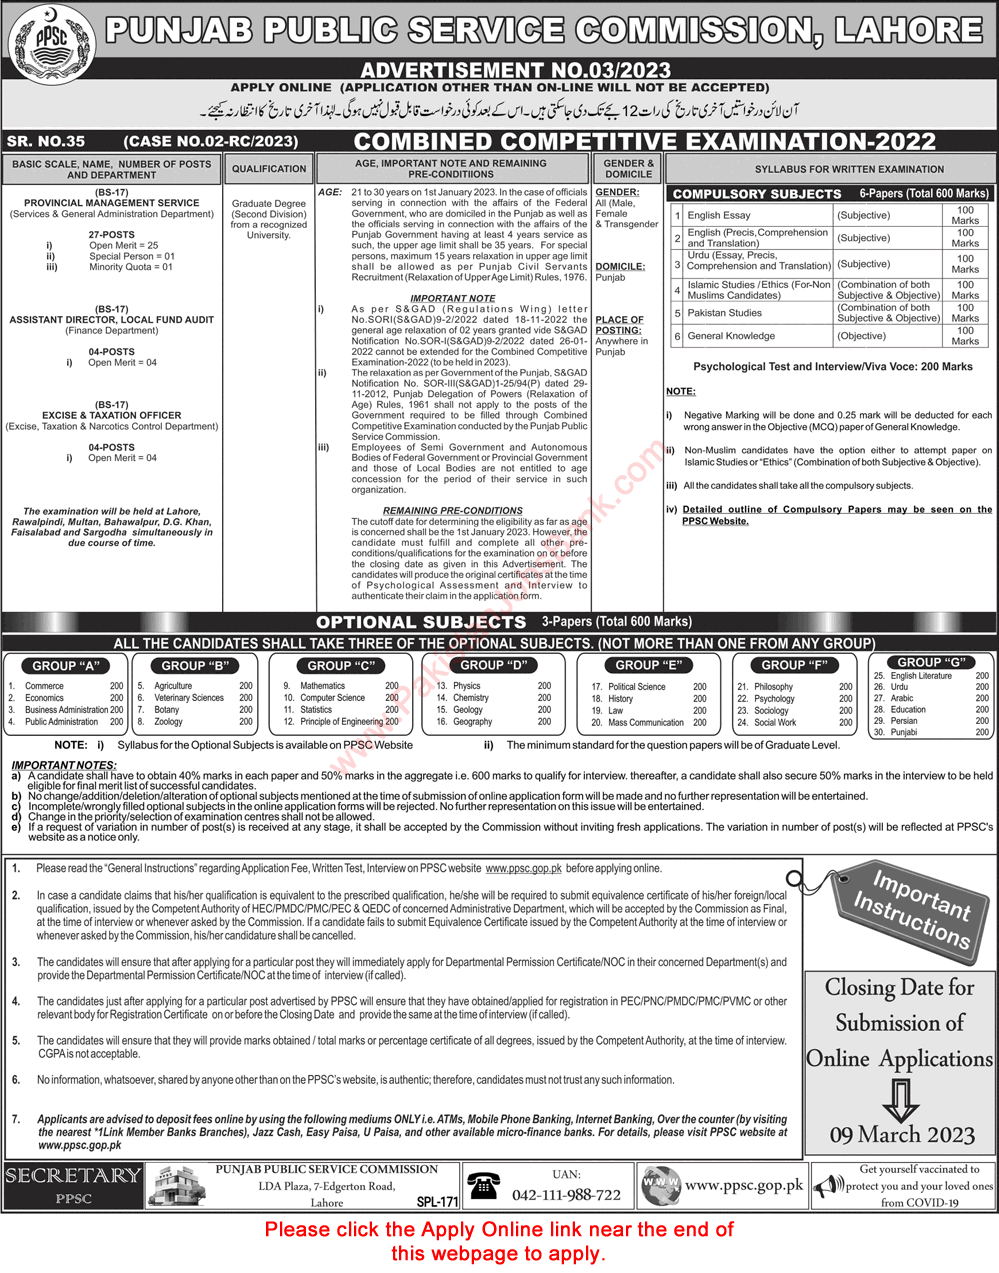 PPSC Combined Competitive Examination 2023 February Online Apply Advertisement No 03/2023 Latest